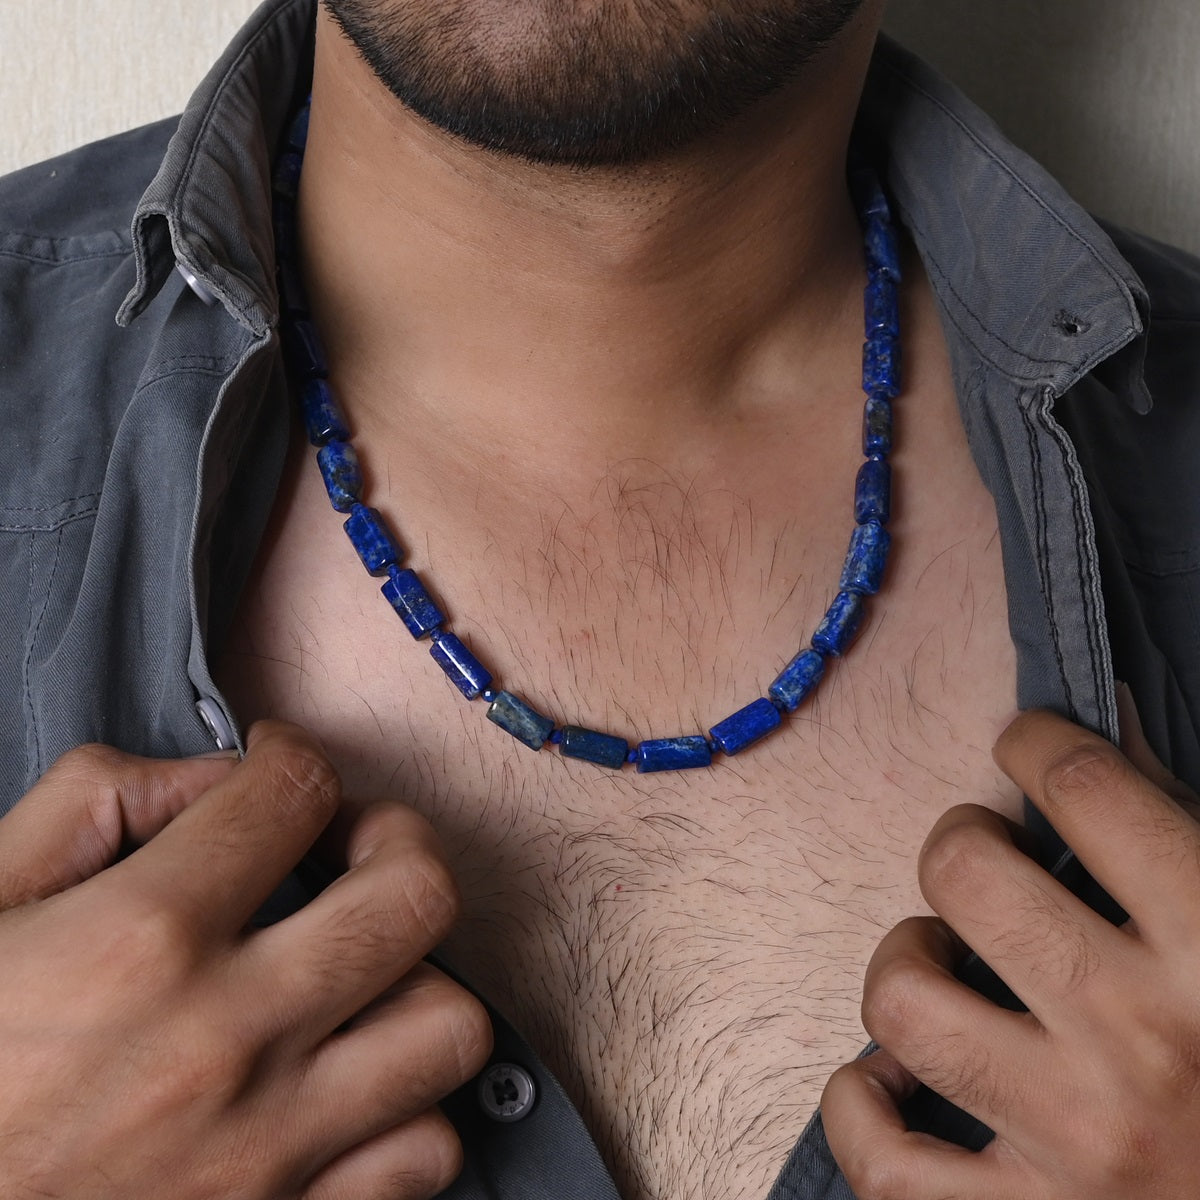 Men's Lapis Lazuli Gemstone Silver Necklace: Versatile accessory for any occasion